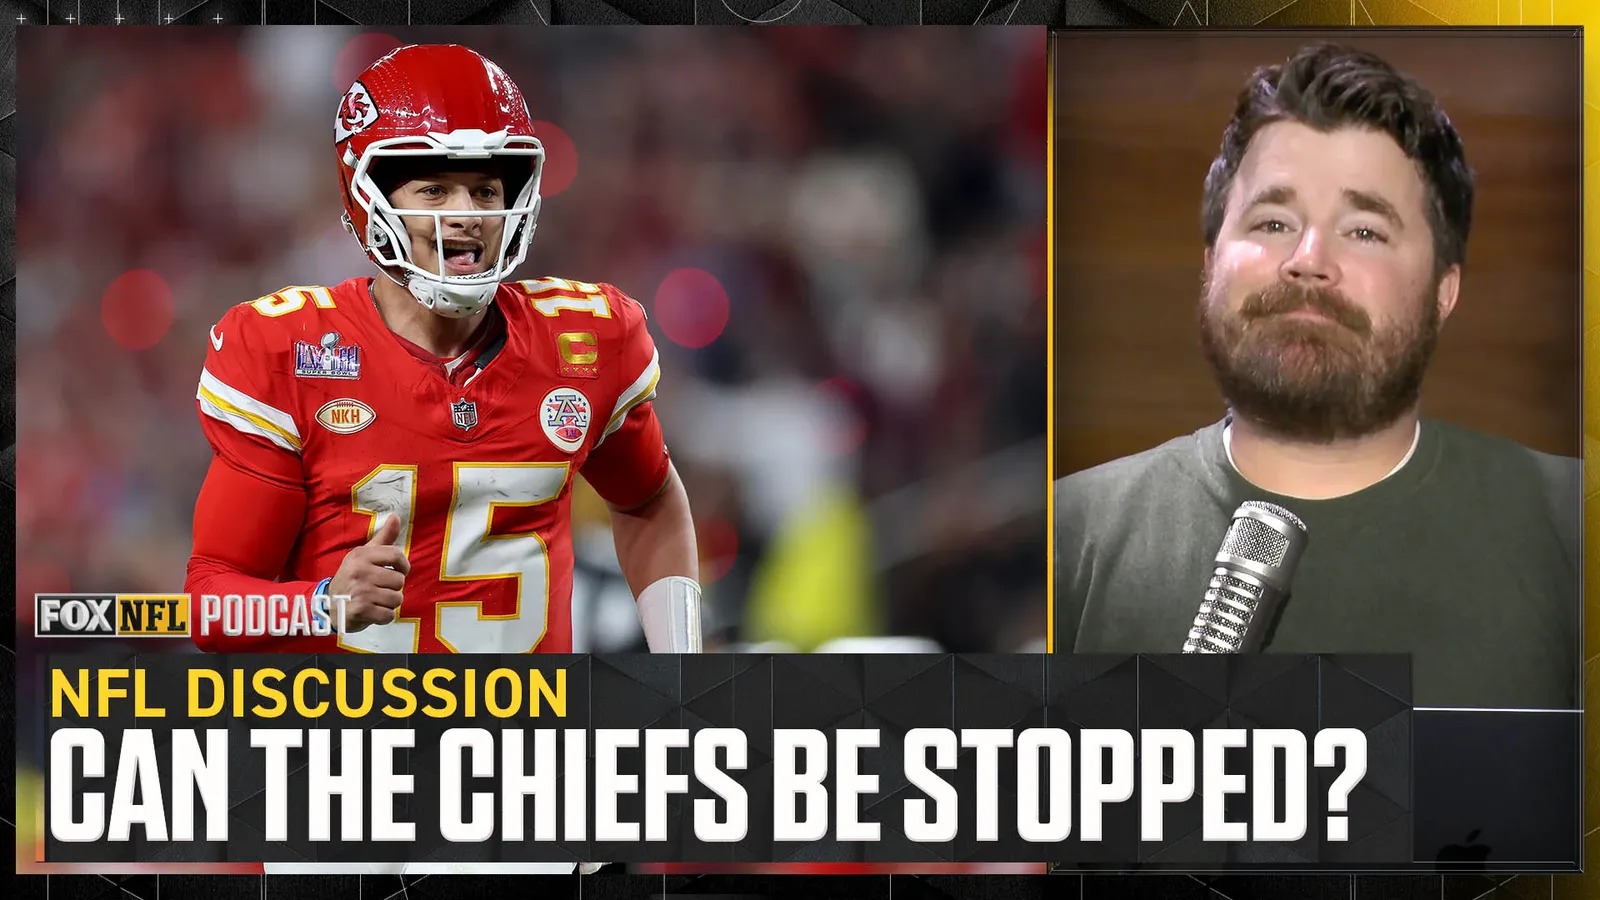 What can teams do to overcome Patrick Mahomes, Chiefs' greatness?